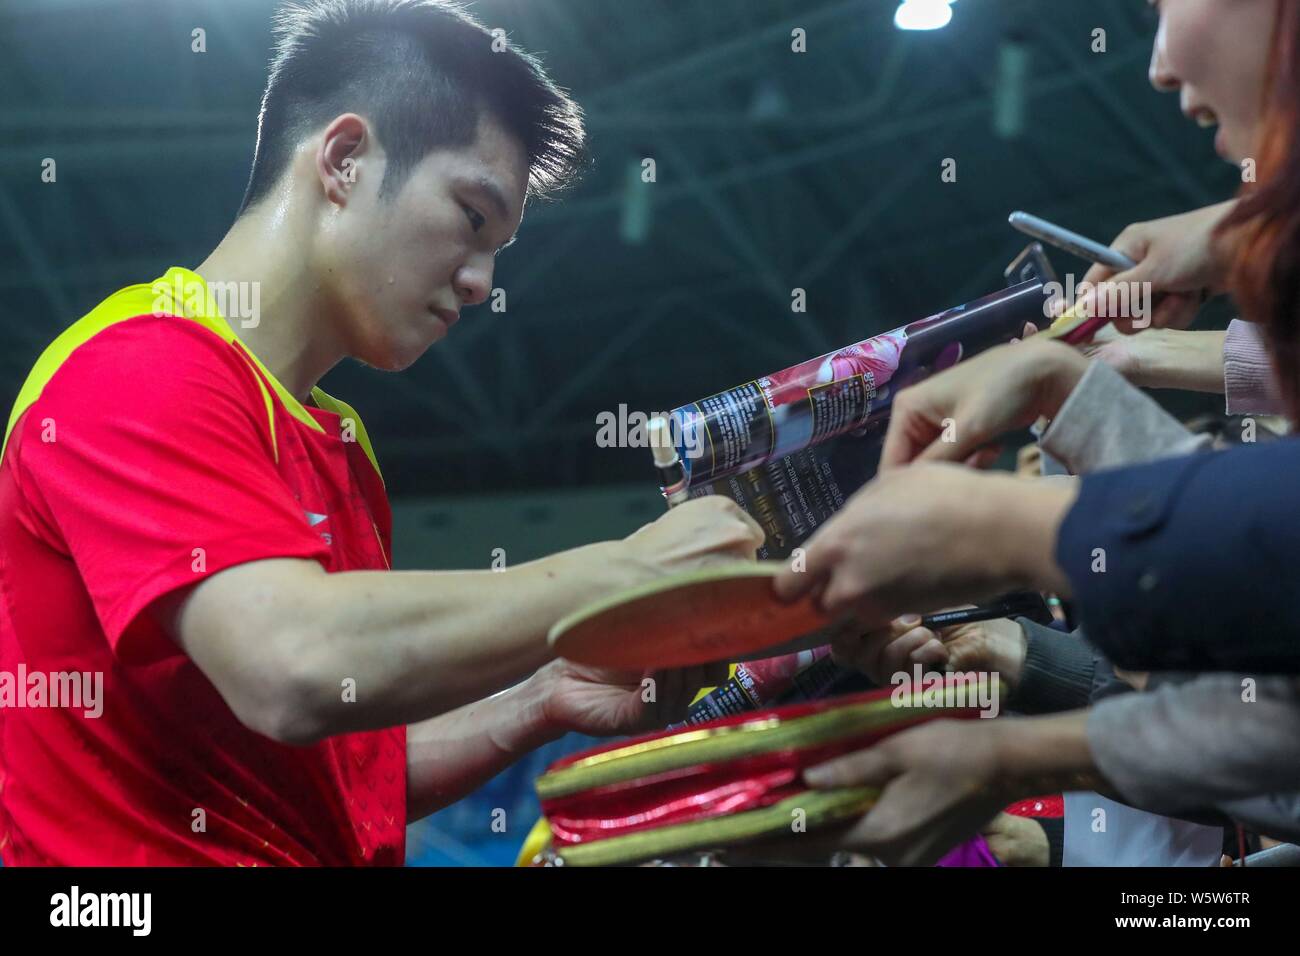 Fan Zhendong of China signs autographs for fans after defeating Koki Niwa of Japan in their men's singles Round of 16 match during the Seamaster 2018 Stock Photo